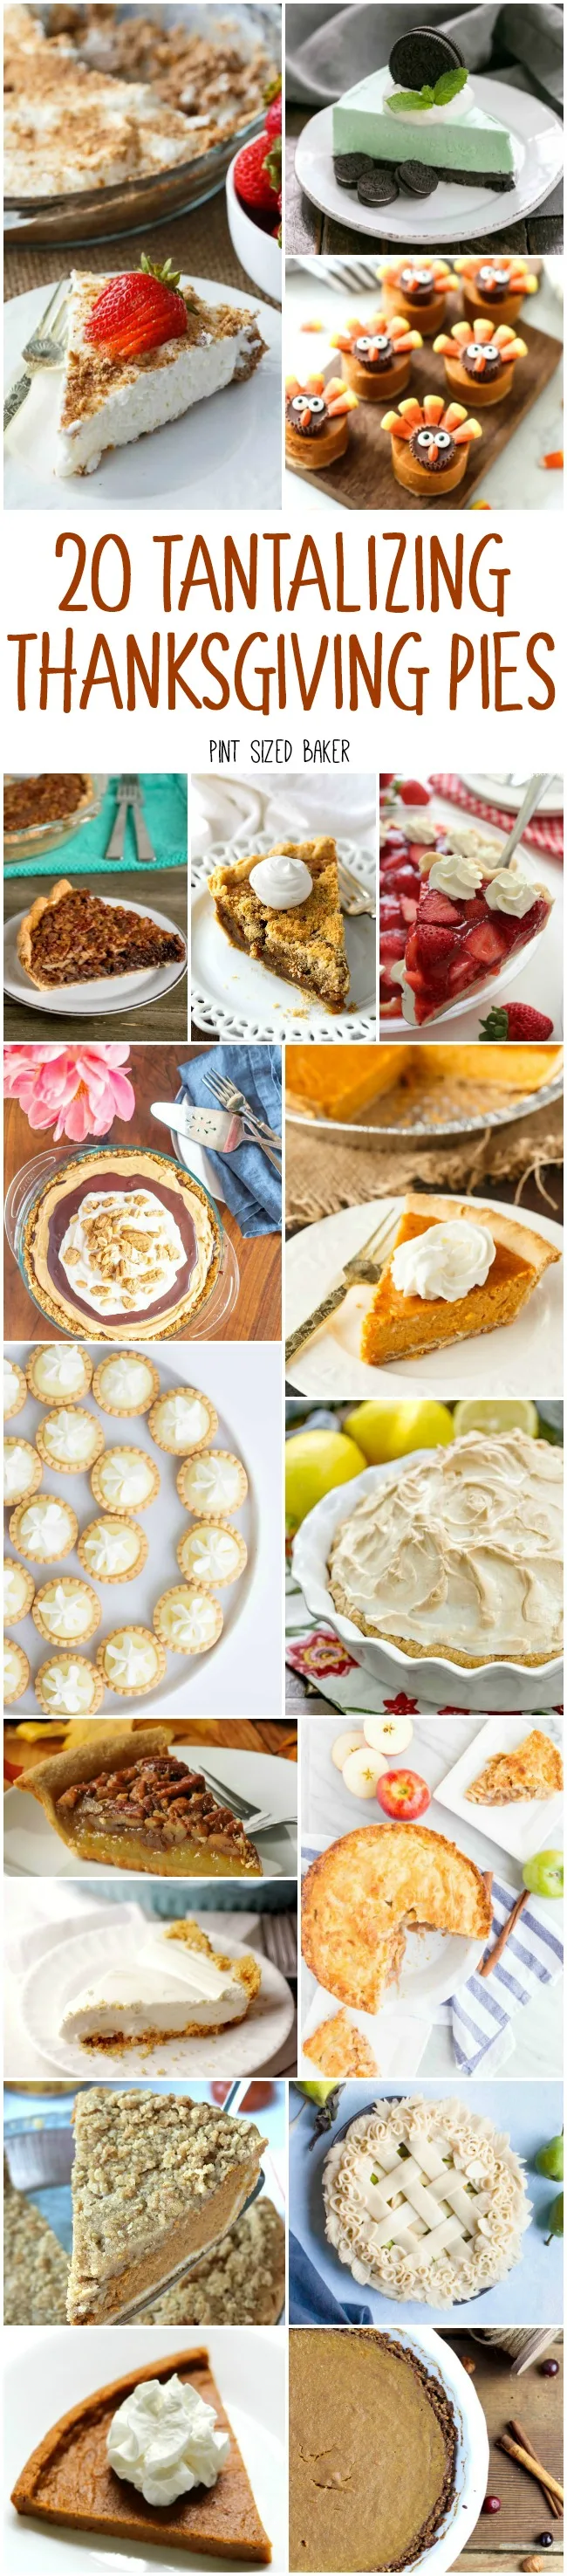 've got 20 Tantalizing Thanksgiving Pies for your fall dessert planning. There are classic pie recipes, some no-bake pies, and a few unique flavors to try. 